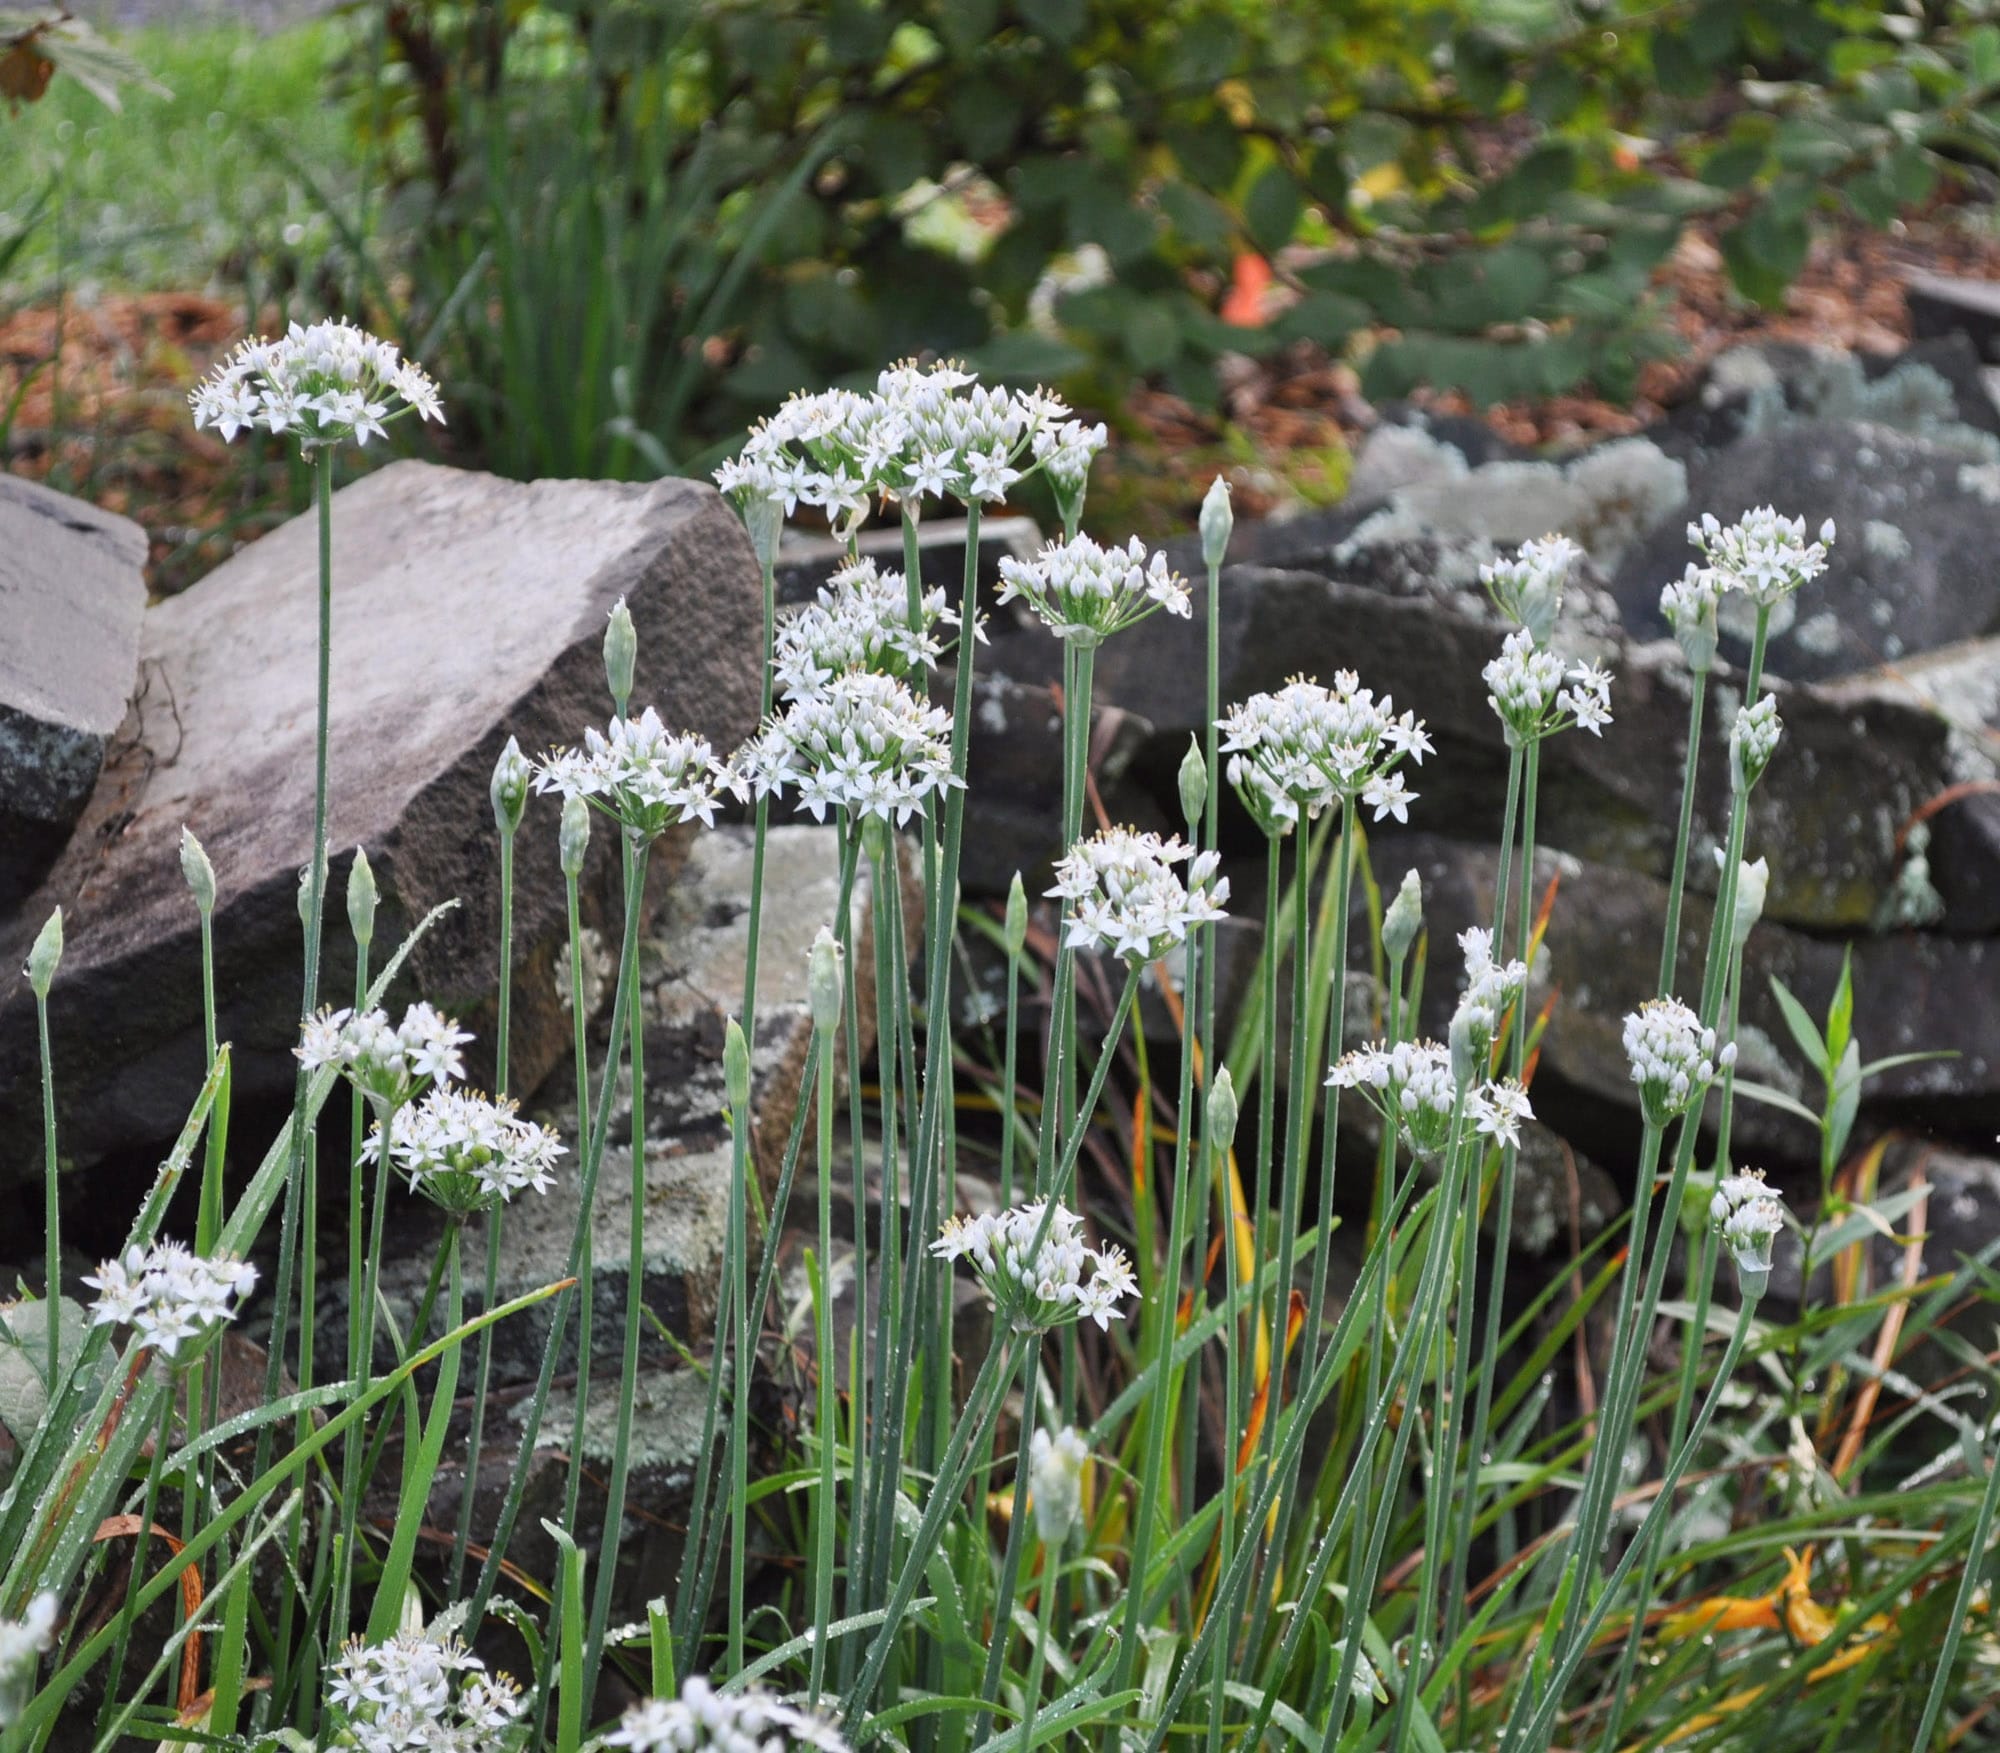 Ggarlic chives which is ornamental, tasty, and -- when grown at an appropriate location, such as the one depicted in New Paltz, N.Y.